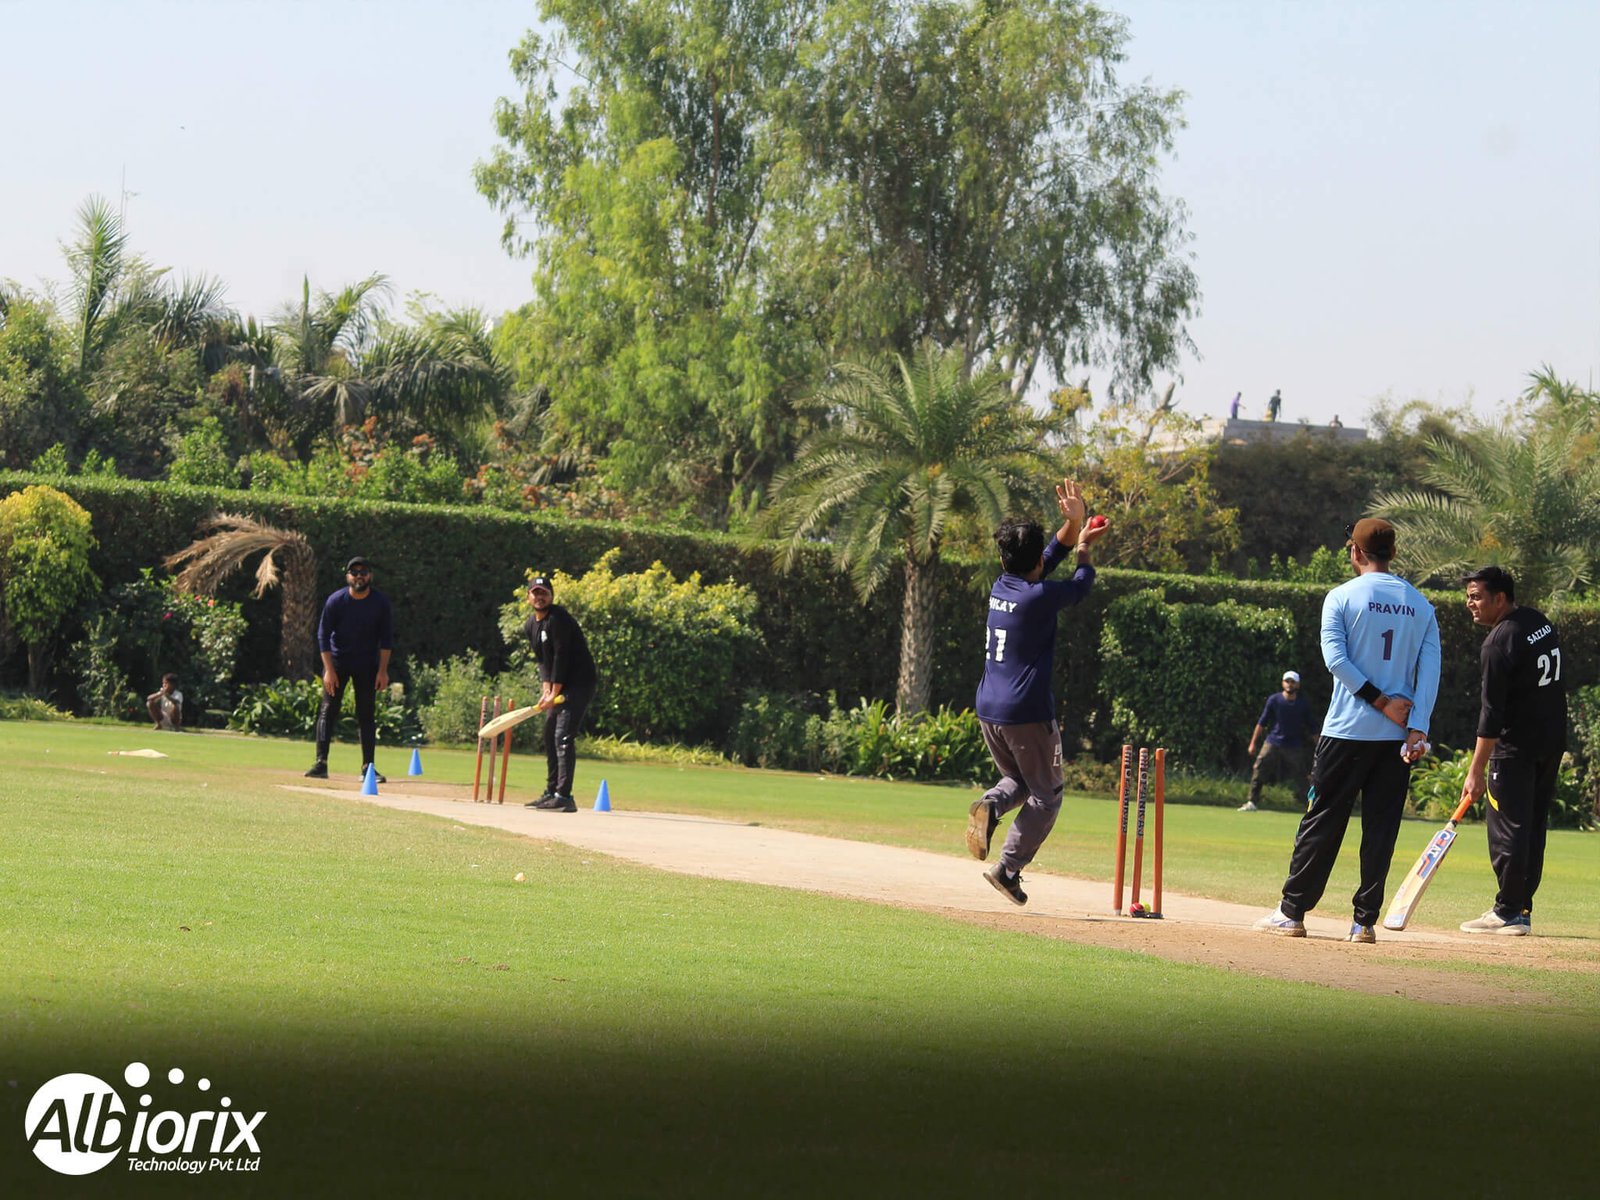 albiorix cricket team playing in league